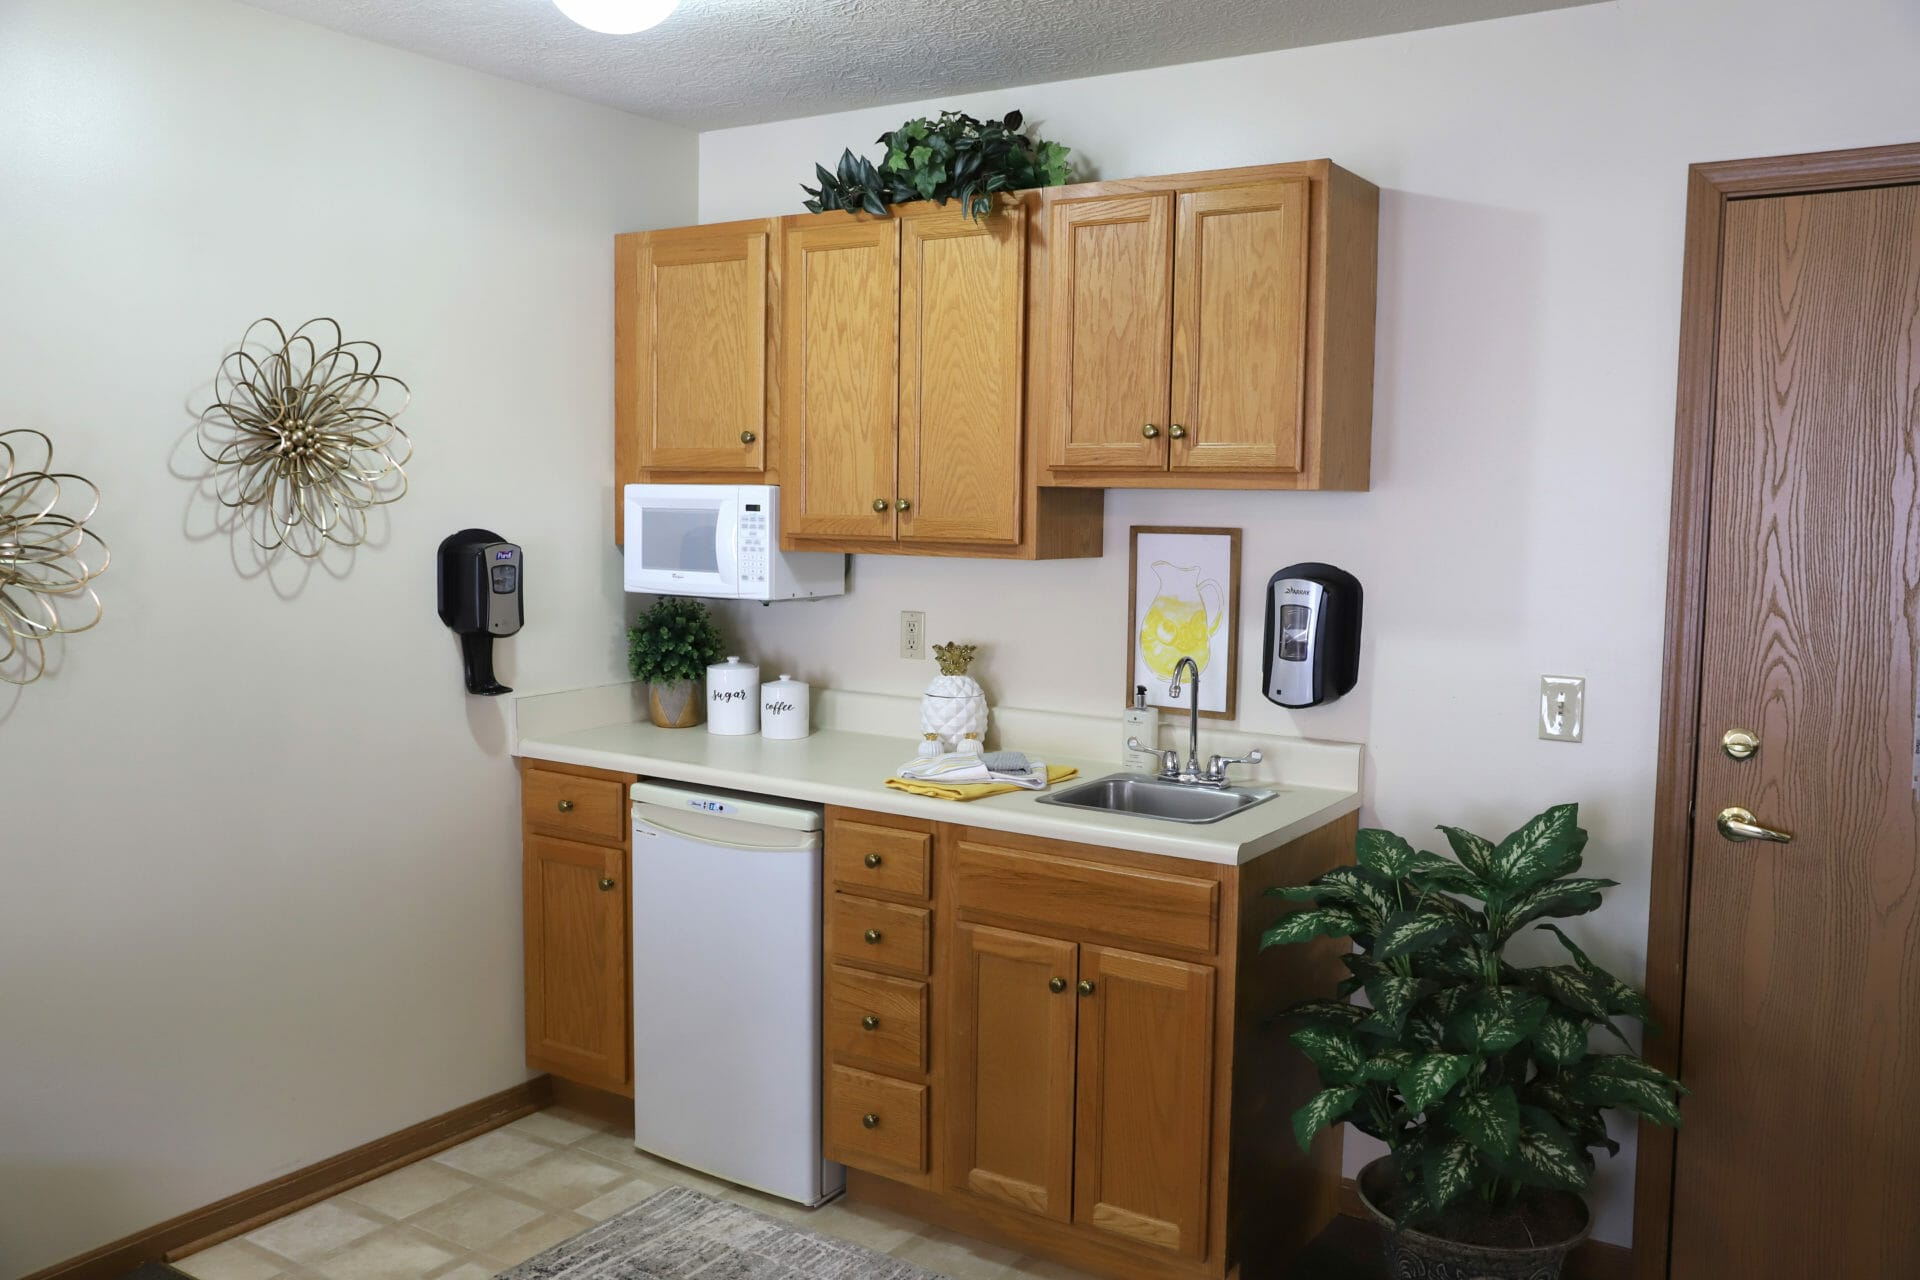 <span  class="uc_style_uc_tiles_grid_image_elementor_uc_items_attribute_title" style="color:#000000;">A kitchenette with a compact dishwasher, sink, and microwave. </span>